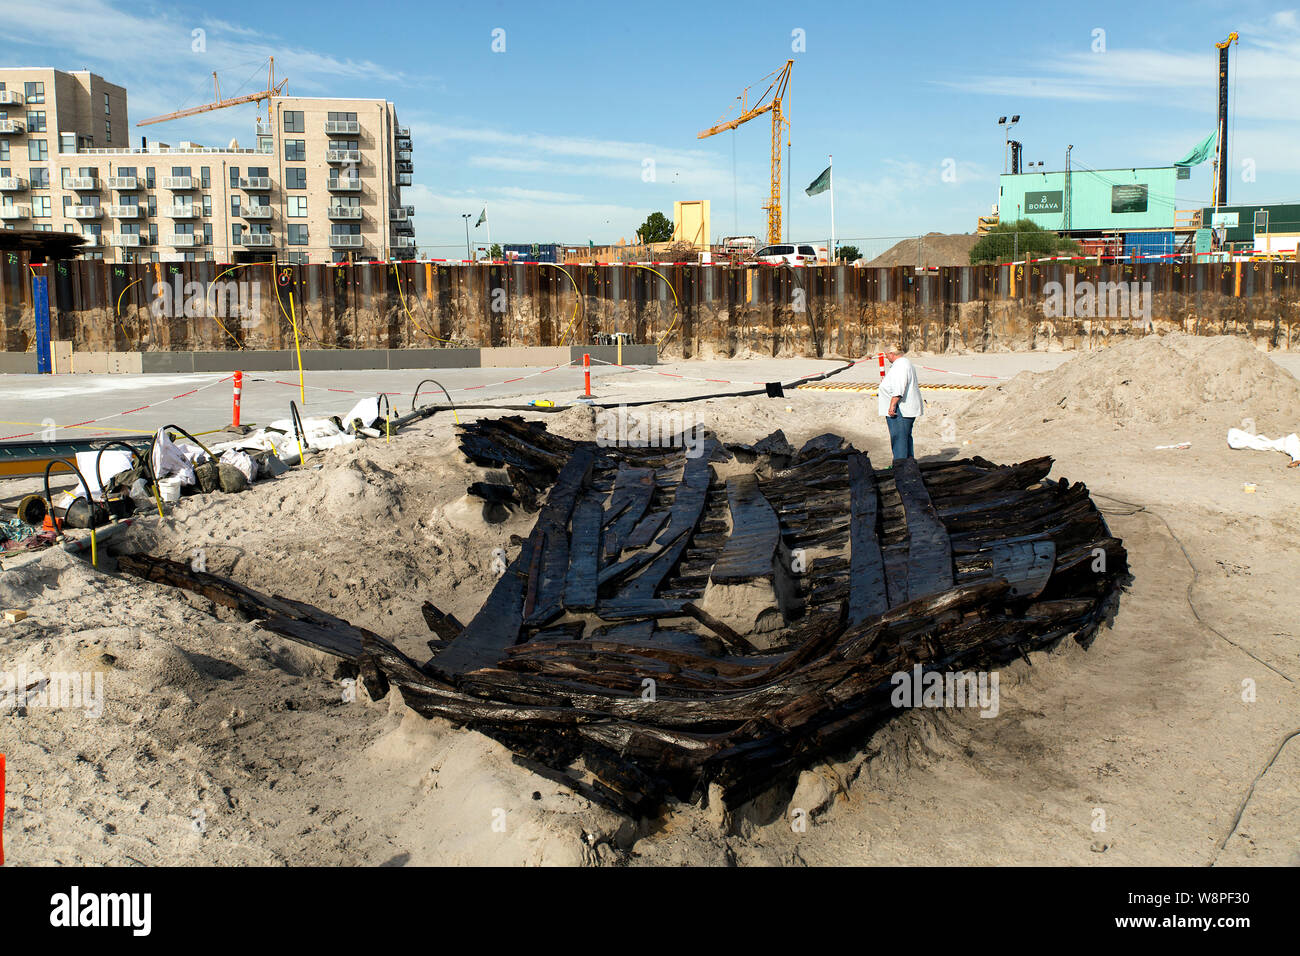 A large 500 years old ship wreck is excavated at a building site near Koege, Denmark.  For further information, se additional information. (Photo by Ole Jensen/Alamy) Stock Photo